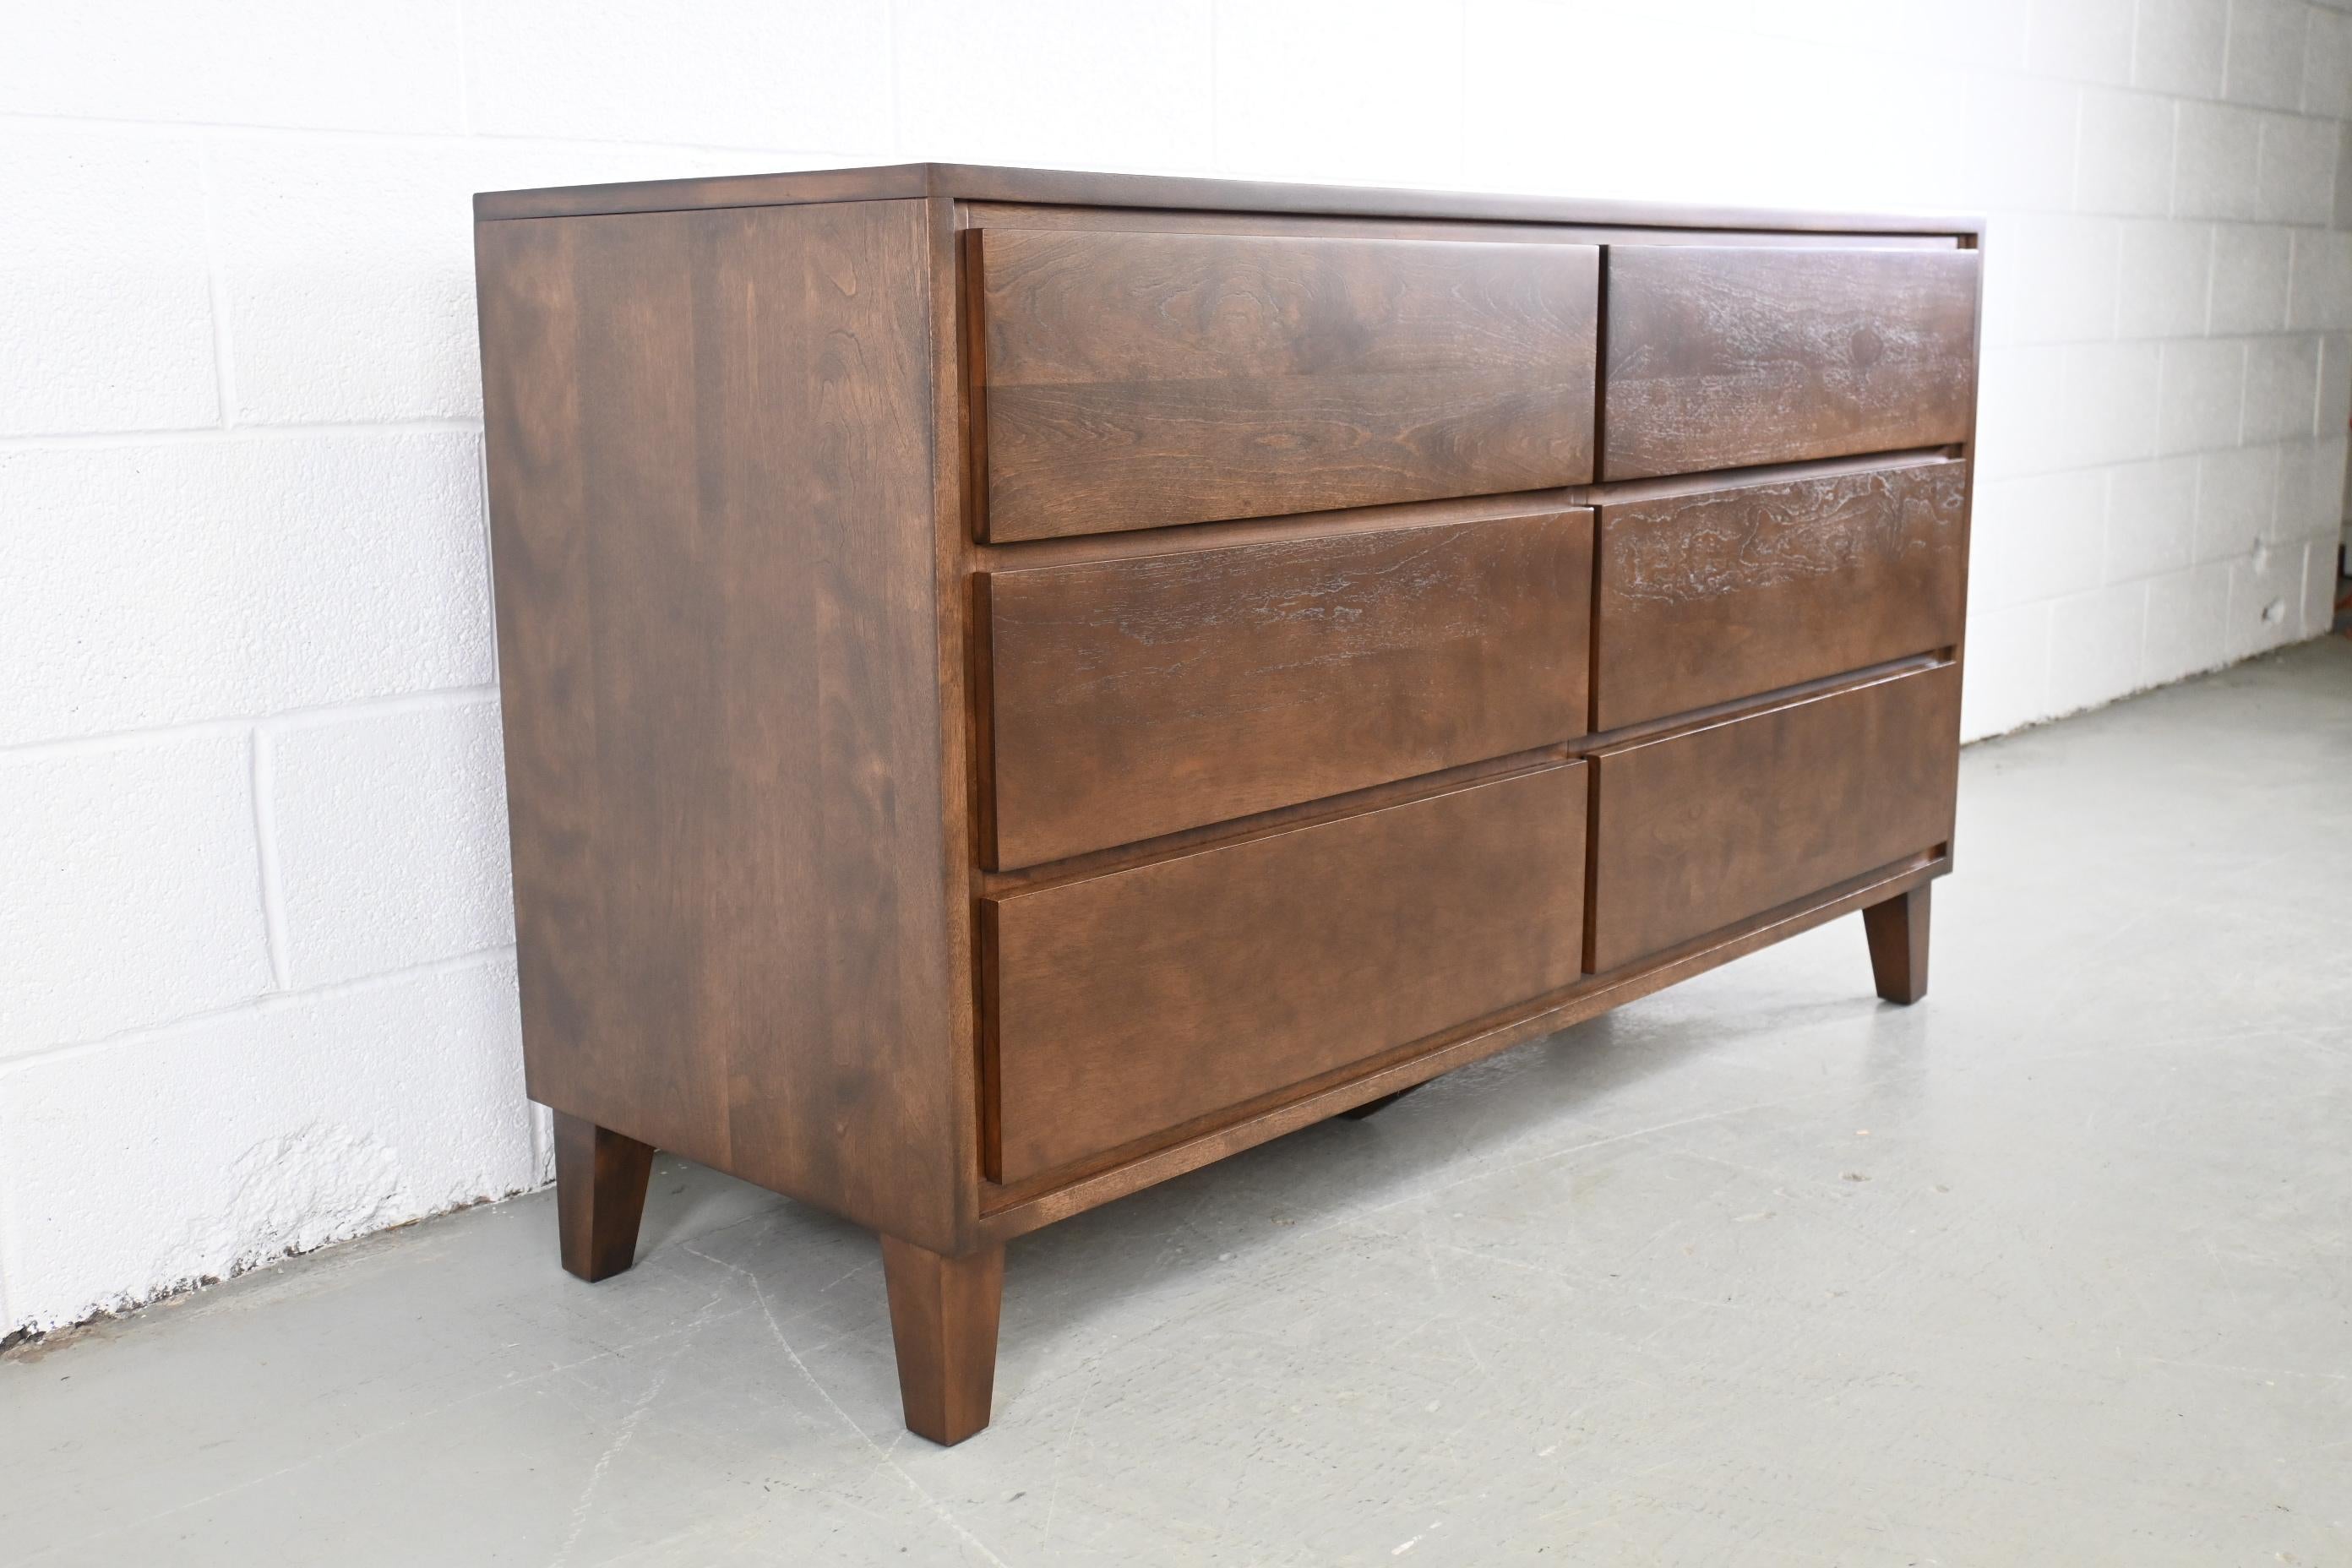 Leslie Diamond for Conant Ball Furniture Mid Century Modern Six Drawer Dresser

Conant Ball Furniture, USA, 1950s

52 Wide x 18.25 Deep x 30 High

Mid century modern solid birch six drawer dresser.

Professionally refinished. Excellent condition.